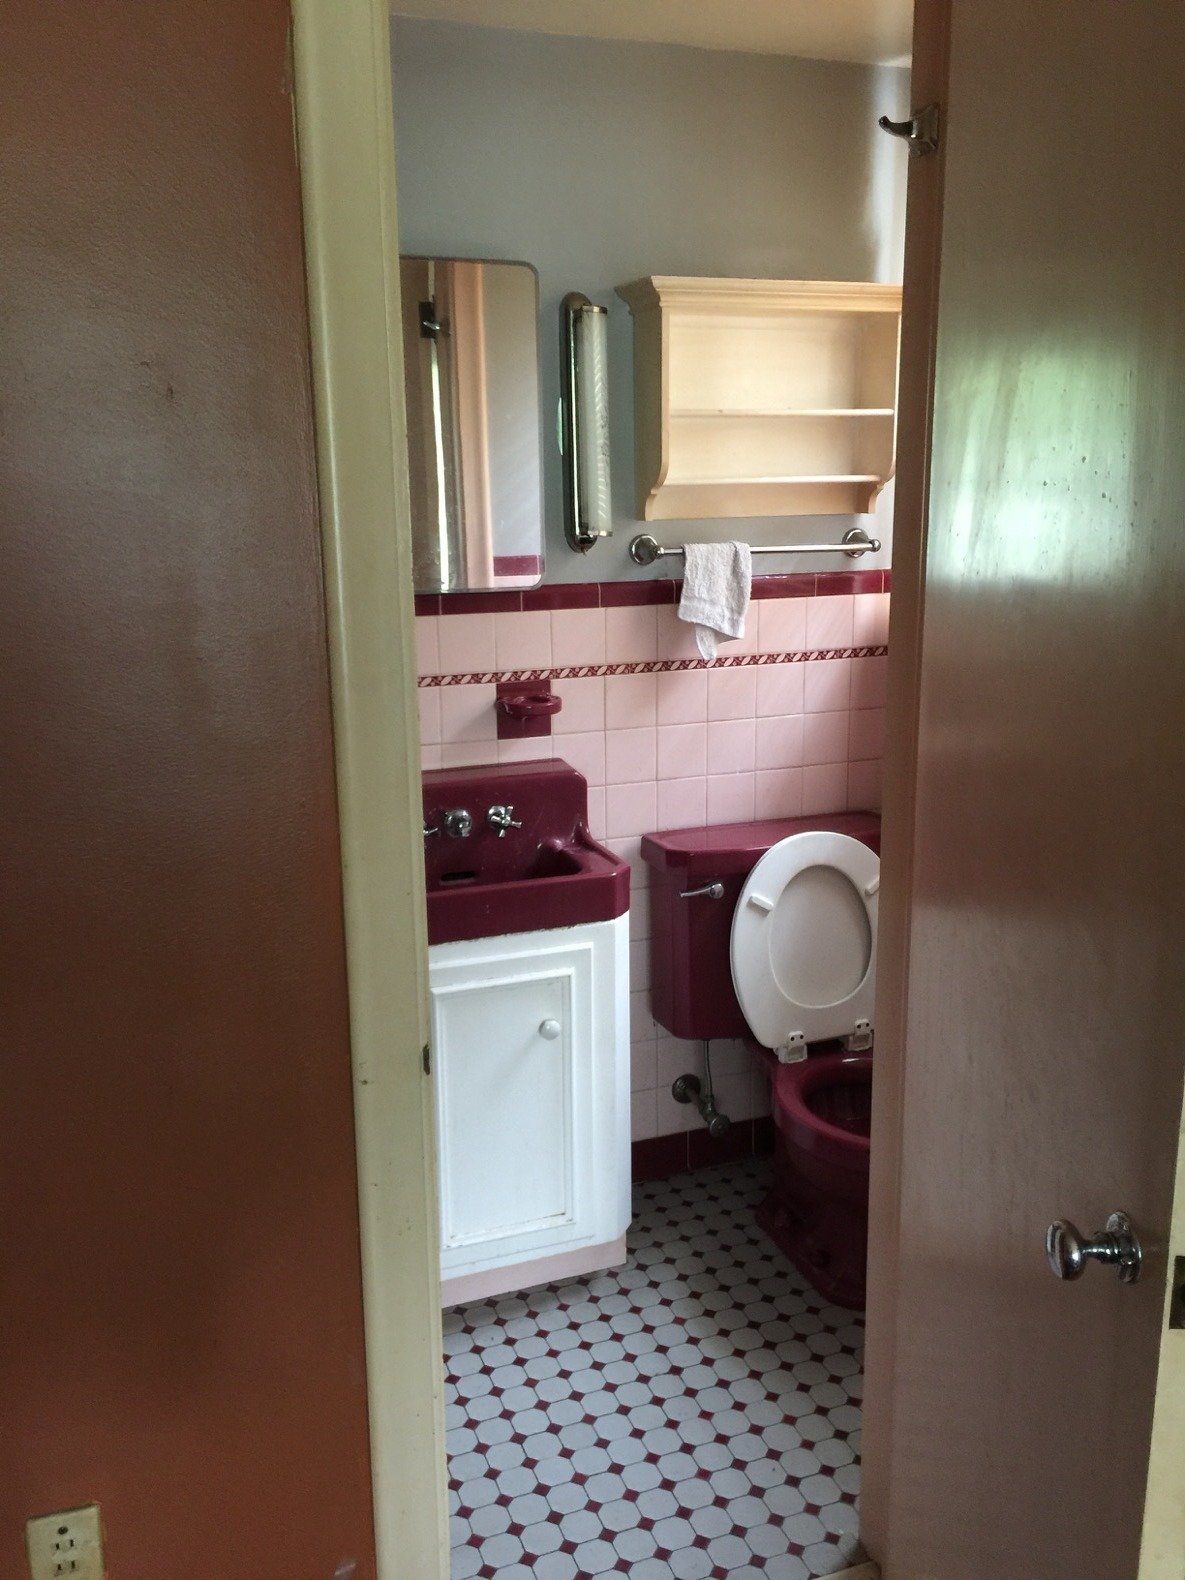 The master bathroom was very small and came with a maroon toilet and a matching sink that the team decided to keep, although the white toilet lid was swapped. 